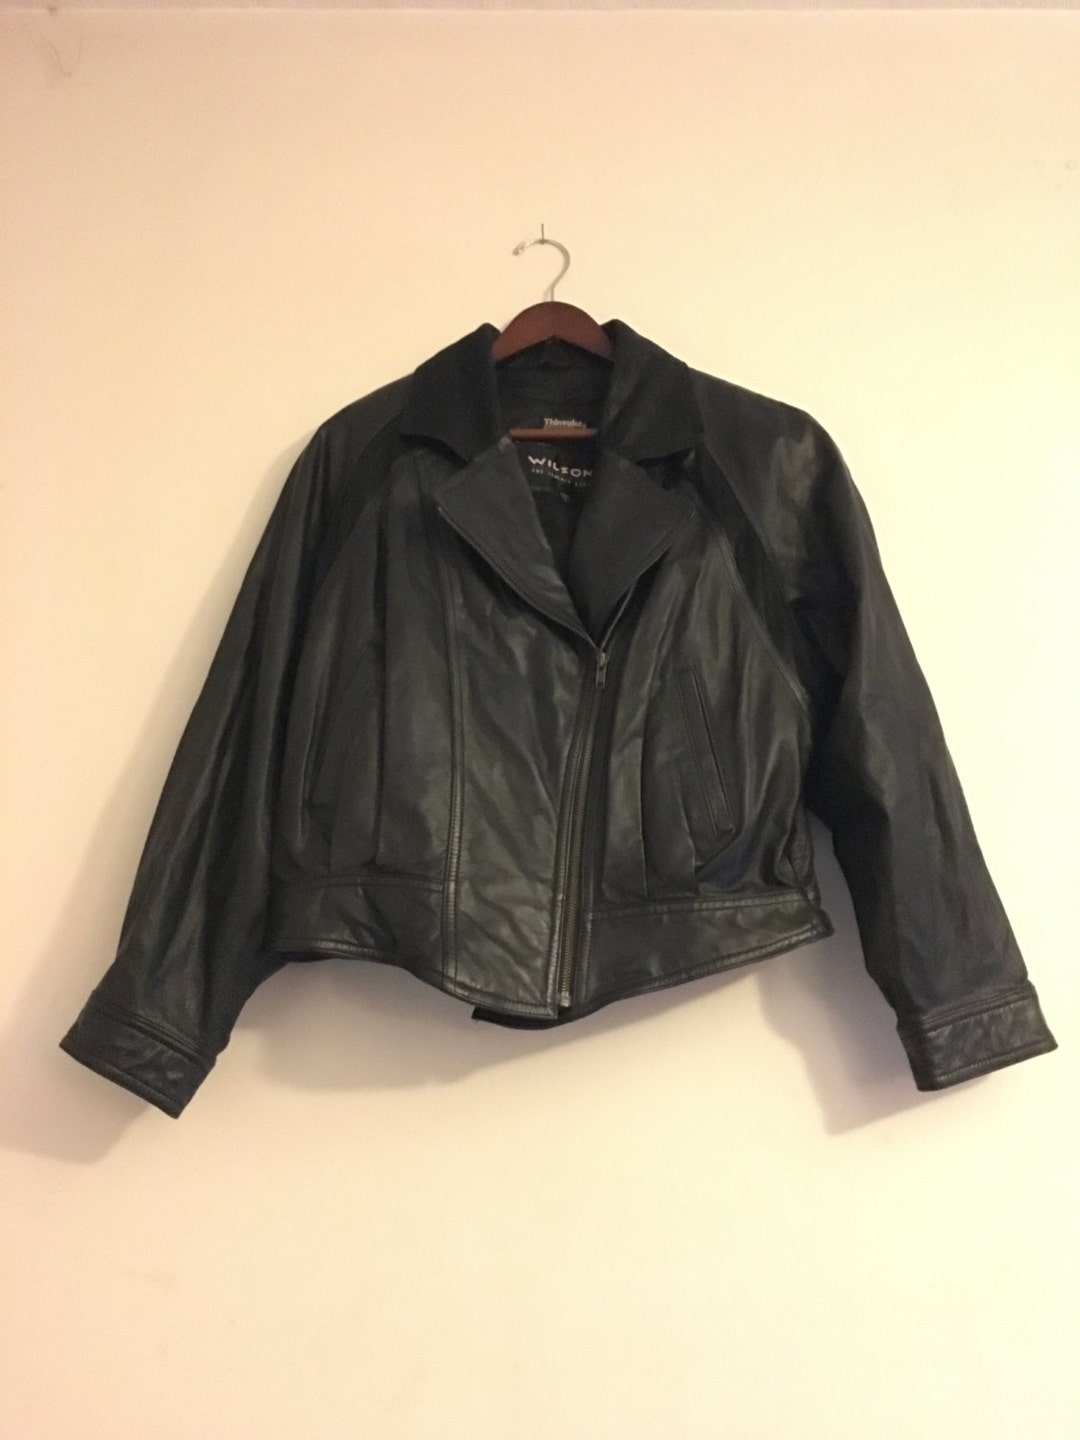 Wilsons Black Leather Ladies Motorcycle Jacket Size Large With ...